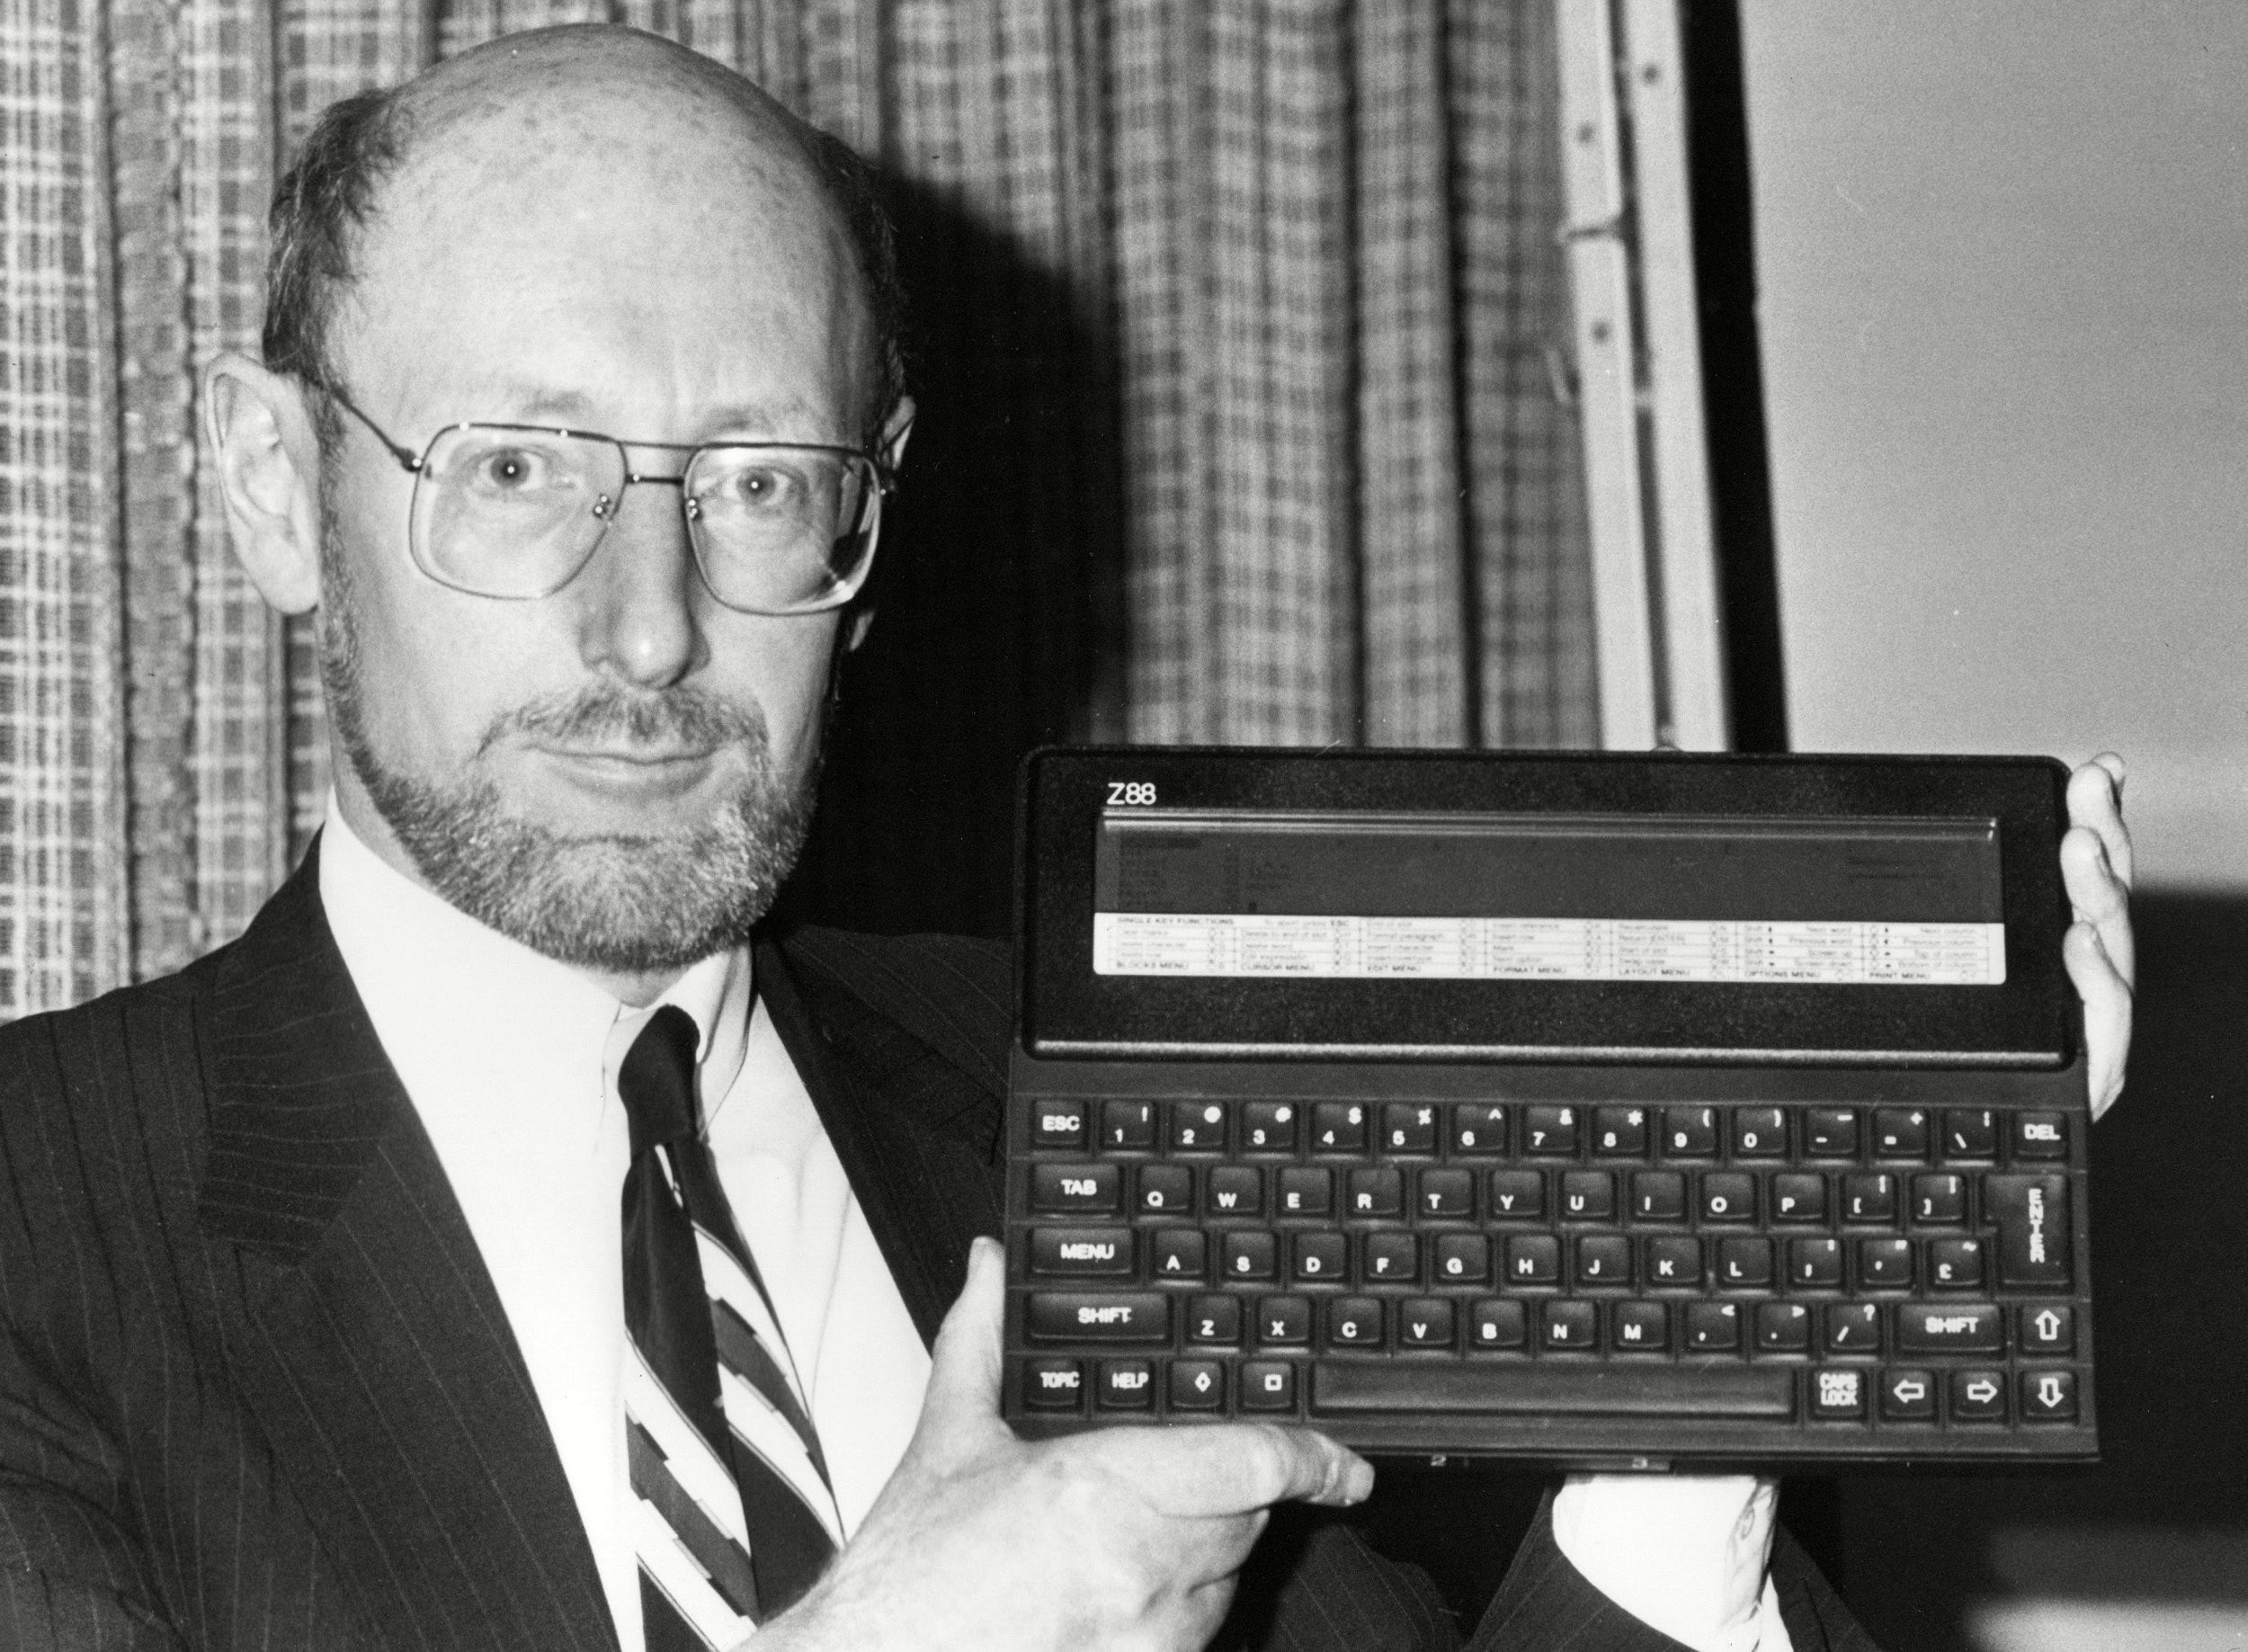 Clive Sinclair, creator of the ZX Spectrum home computer, has died